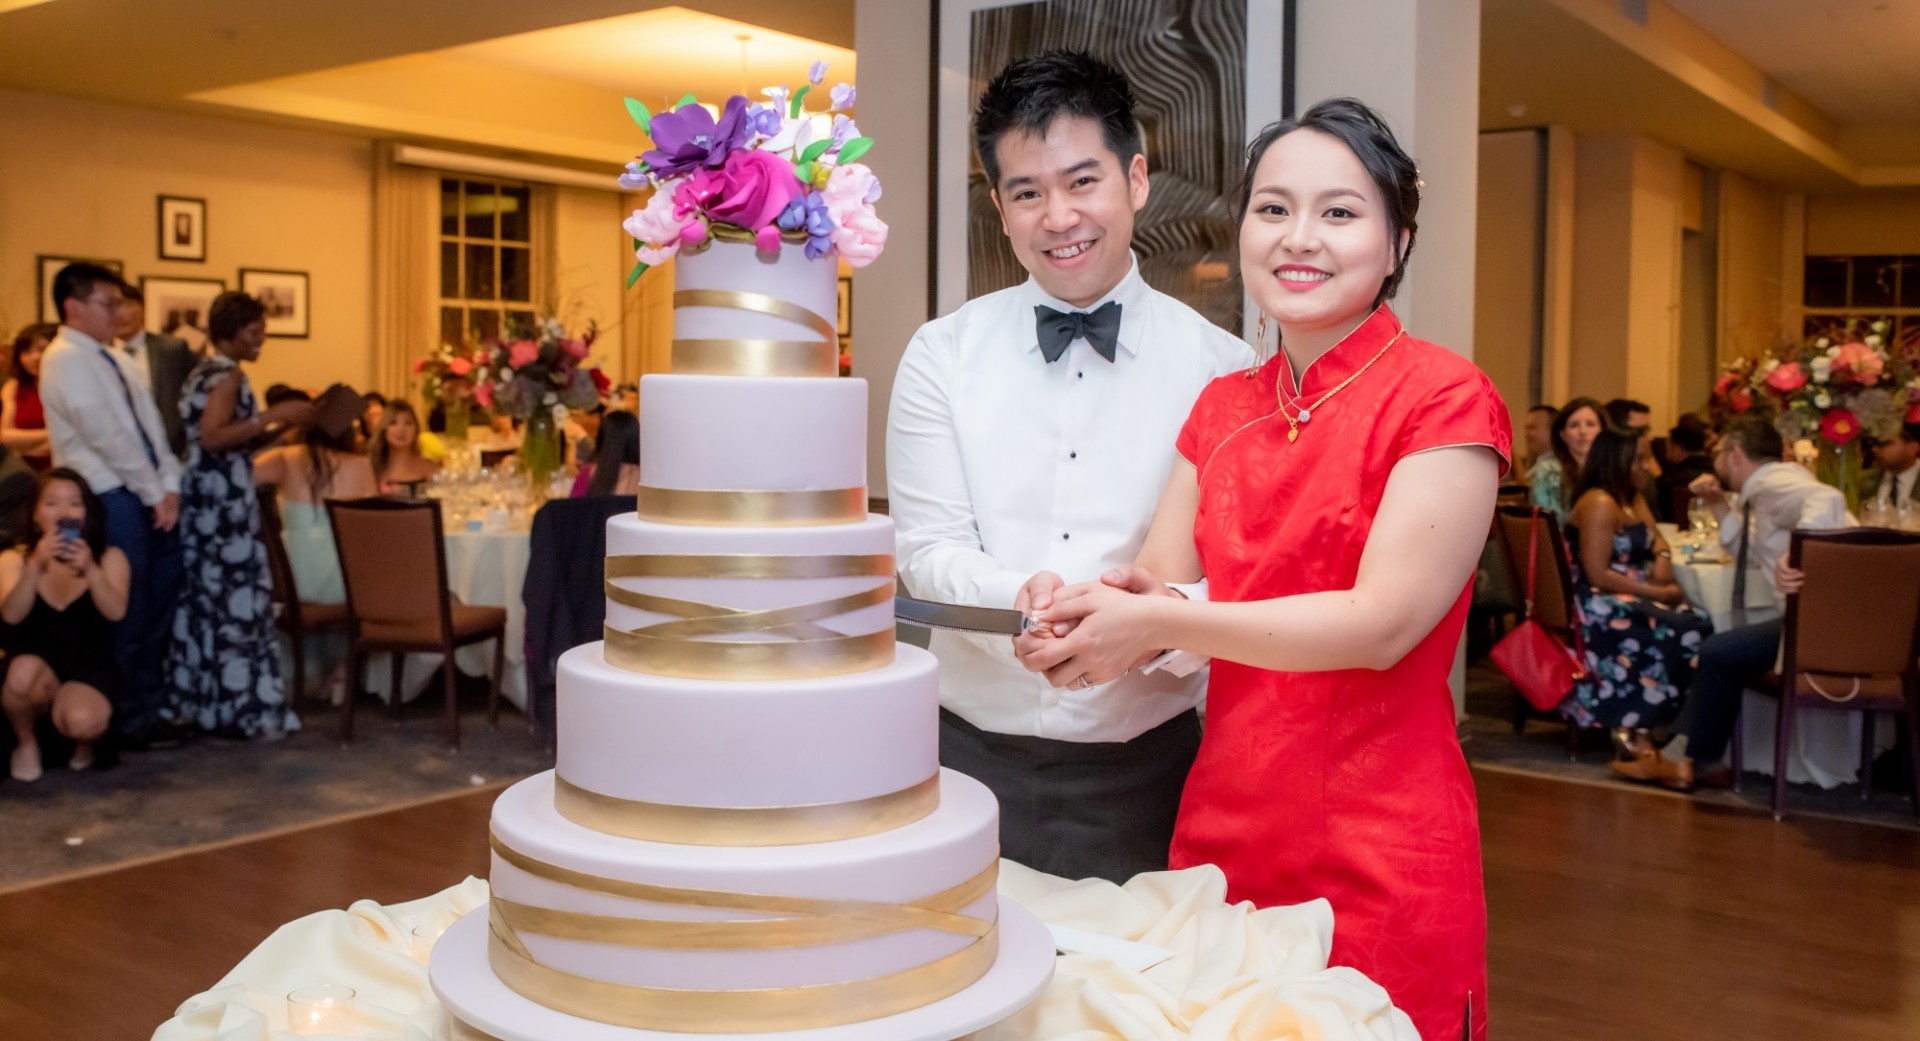 A happy couple about to cut into their cake, adorned with flowers and encased in gold ribbon.